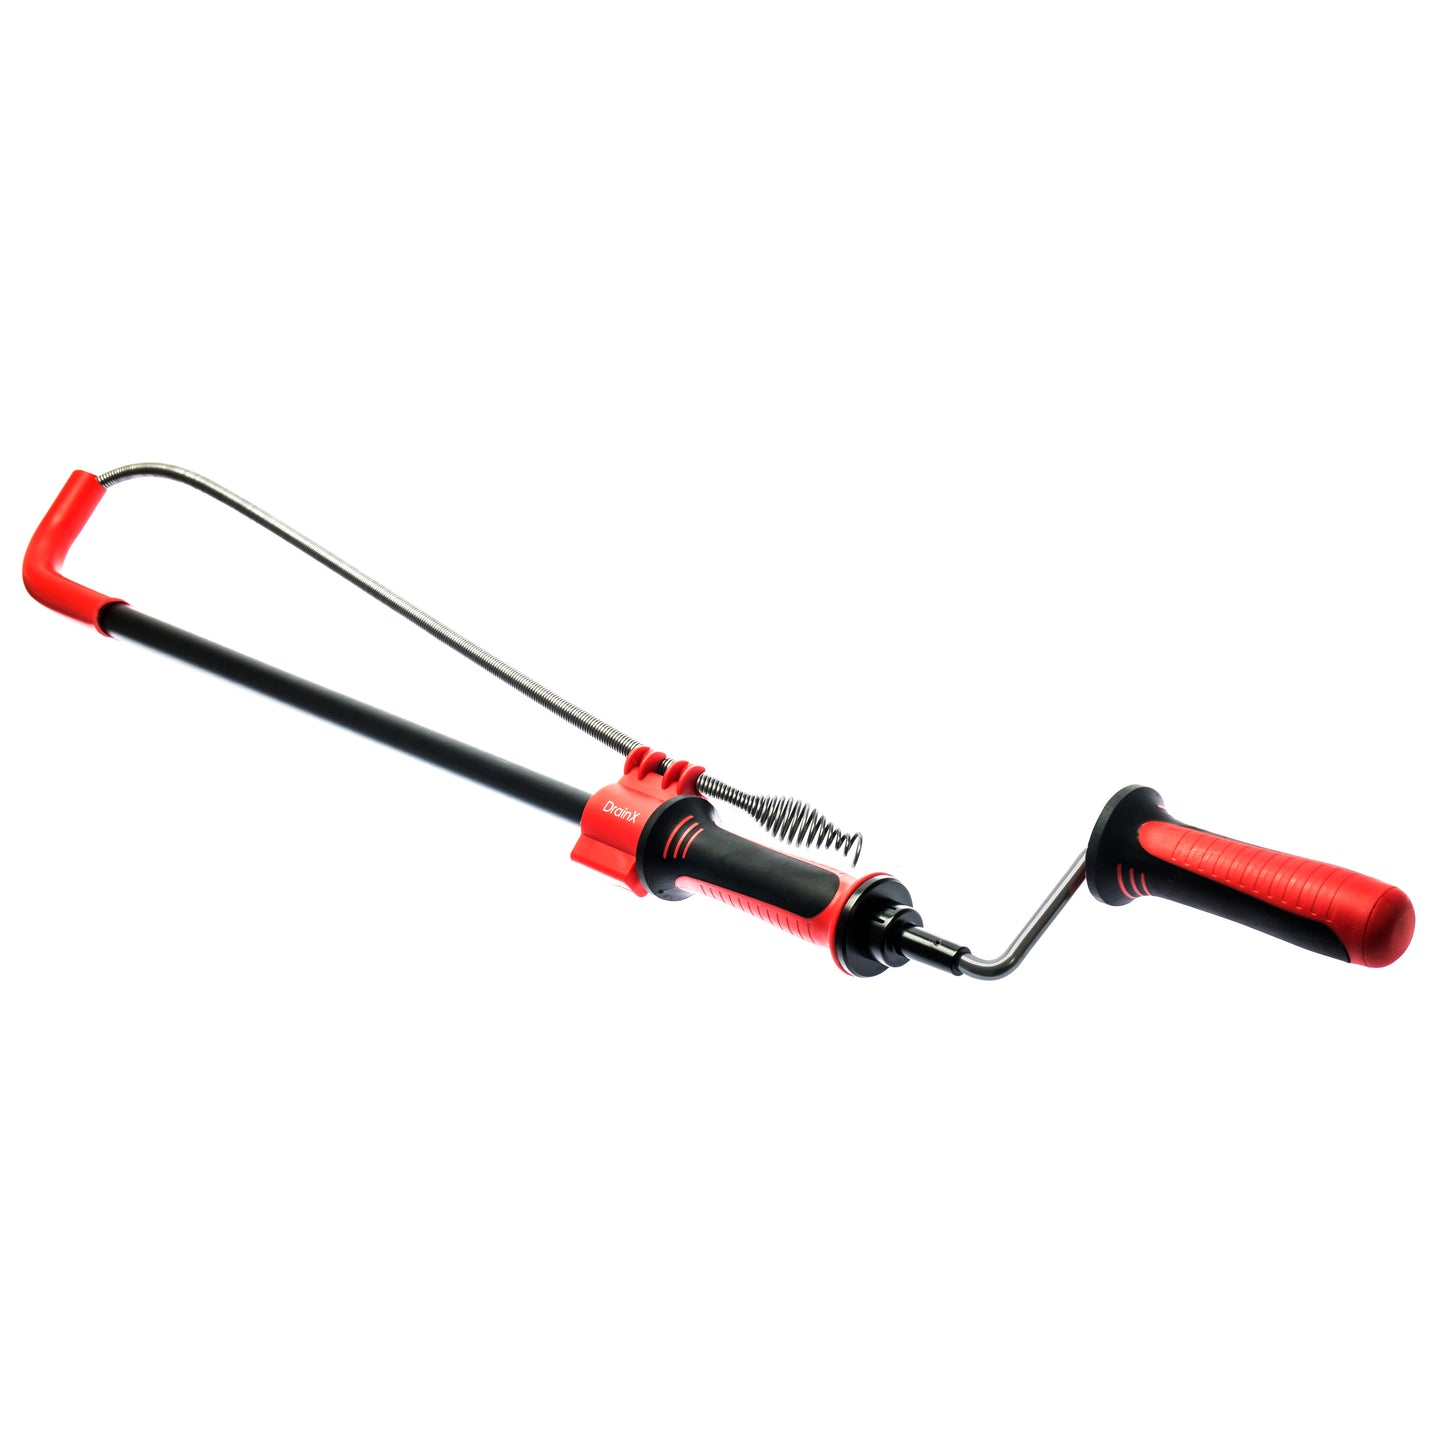 6FT Toilet Auger with Heavy Duty Bulbhead | Use with Drill or Manually